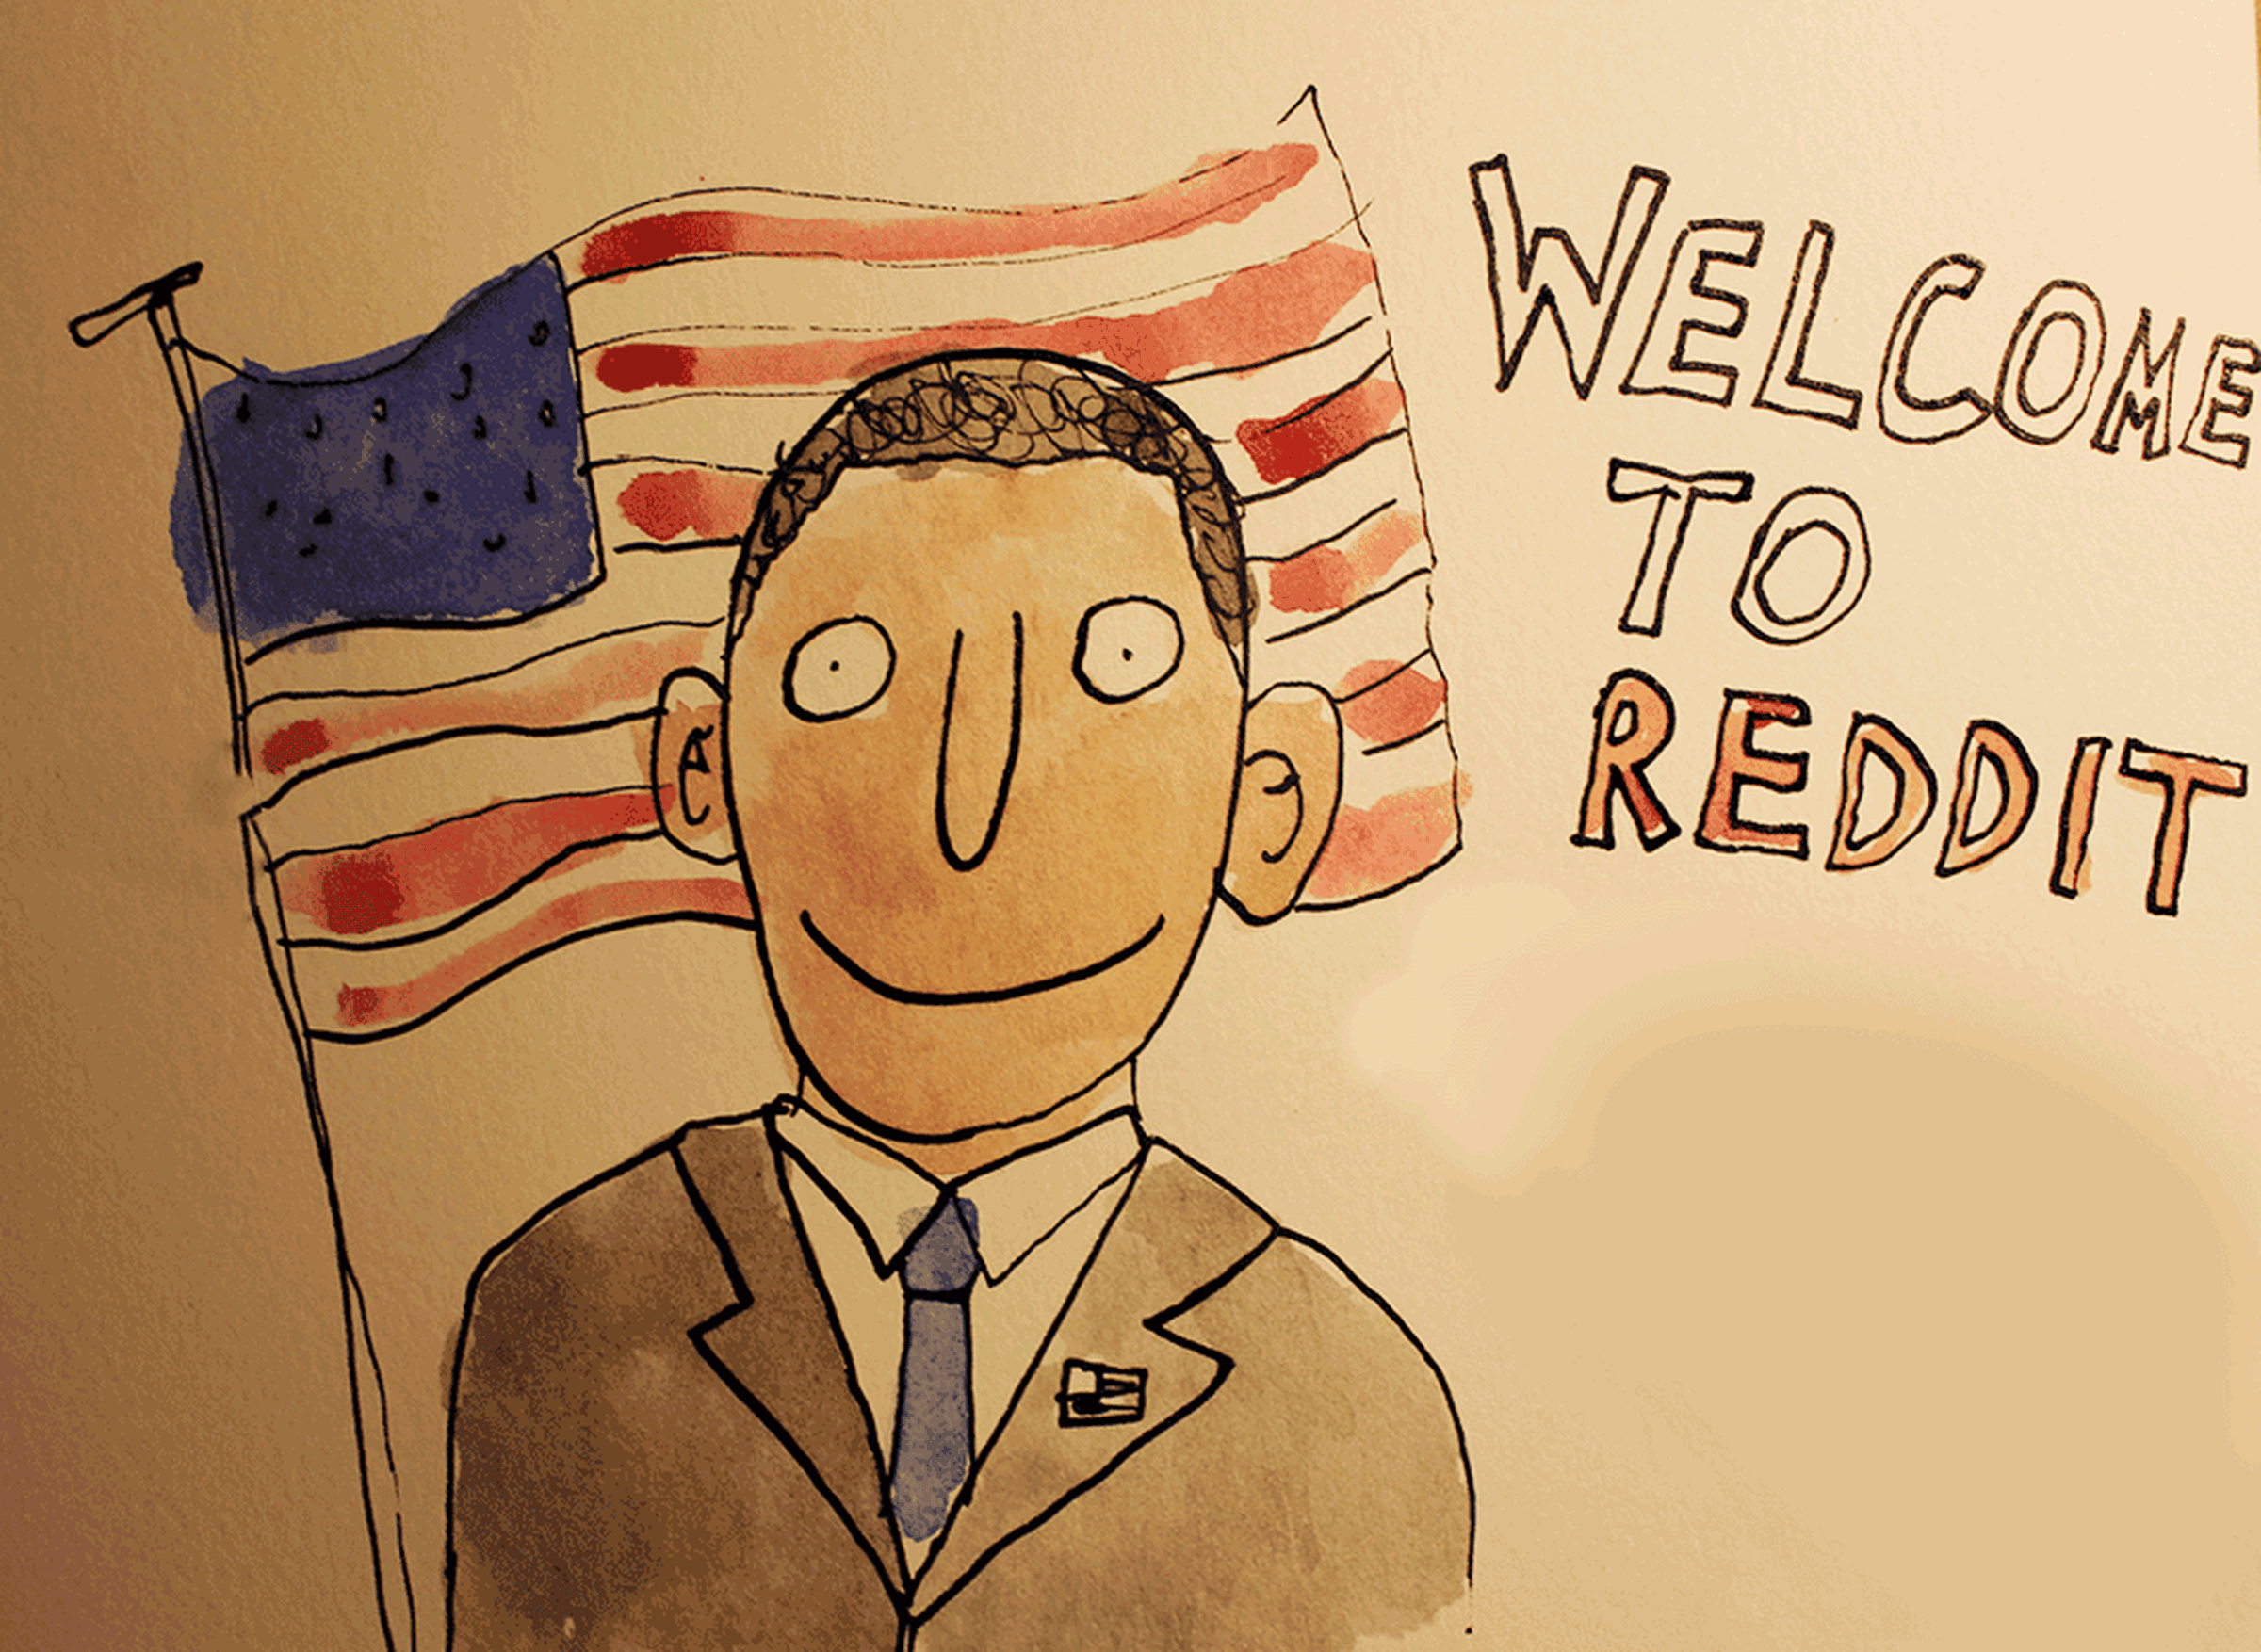 Shitty_Watercolour grew from a low-key Reddit user to a world-famous painter. His portrait of Barack Obama during the former president’s 2012 presidential run was hung in campaign headquarters.